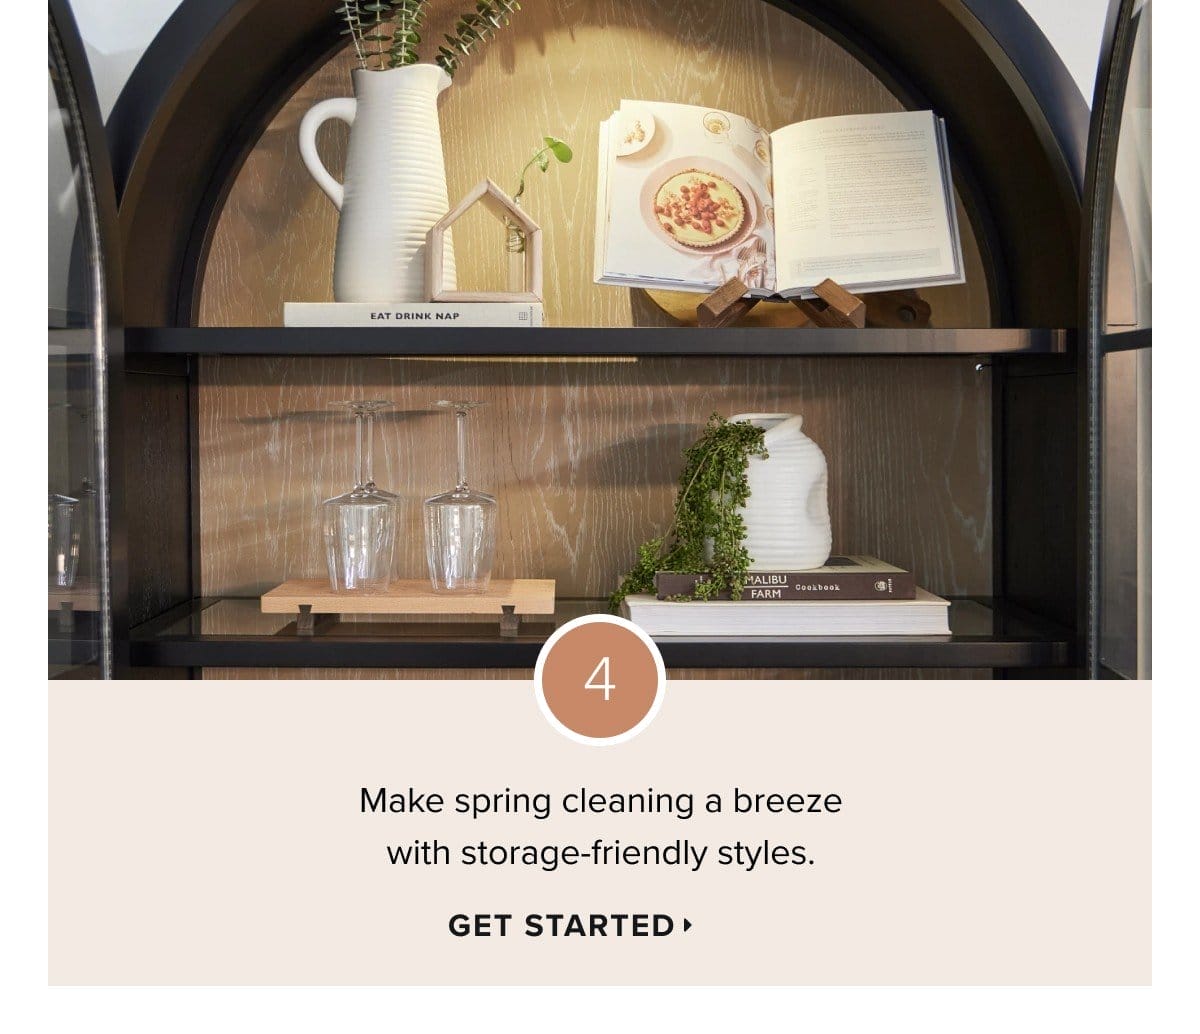 4. make spring cleaning a breeze with storage-friendly styles